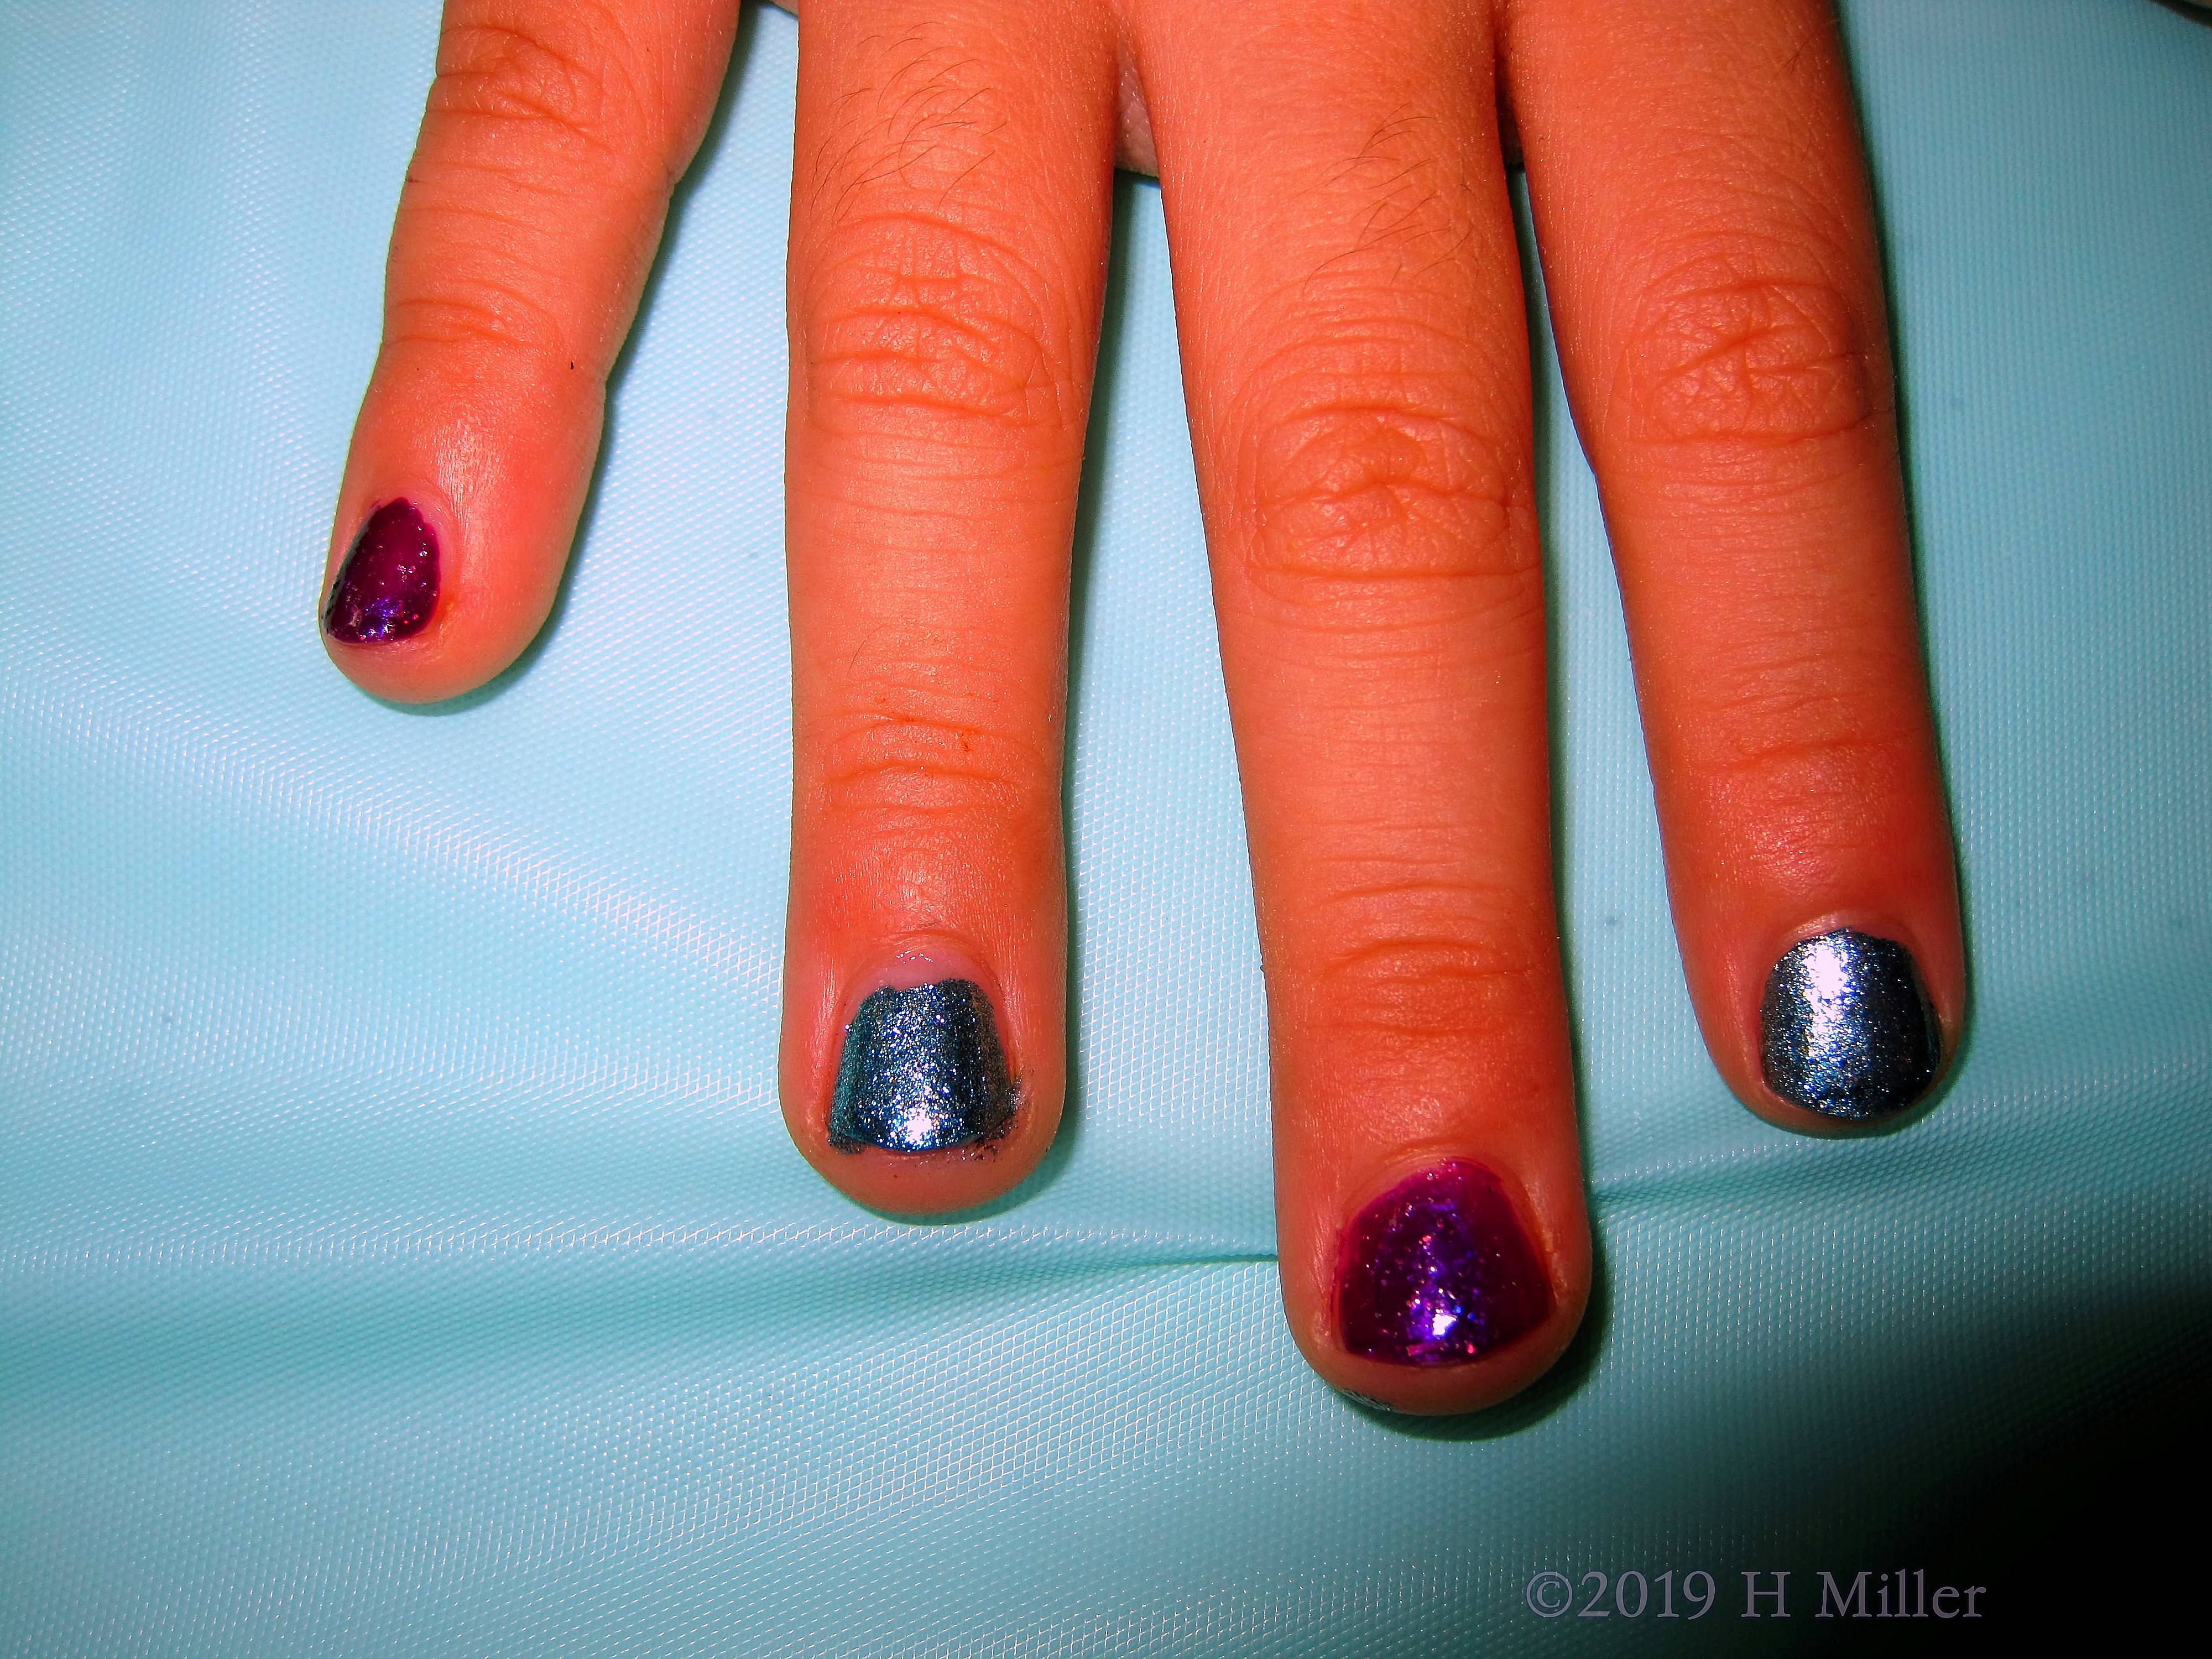 All That Glitters! Purple And Teal Glitter Polish For Kids Mani!